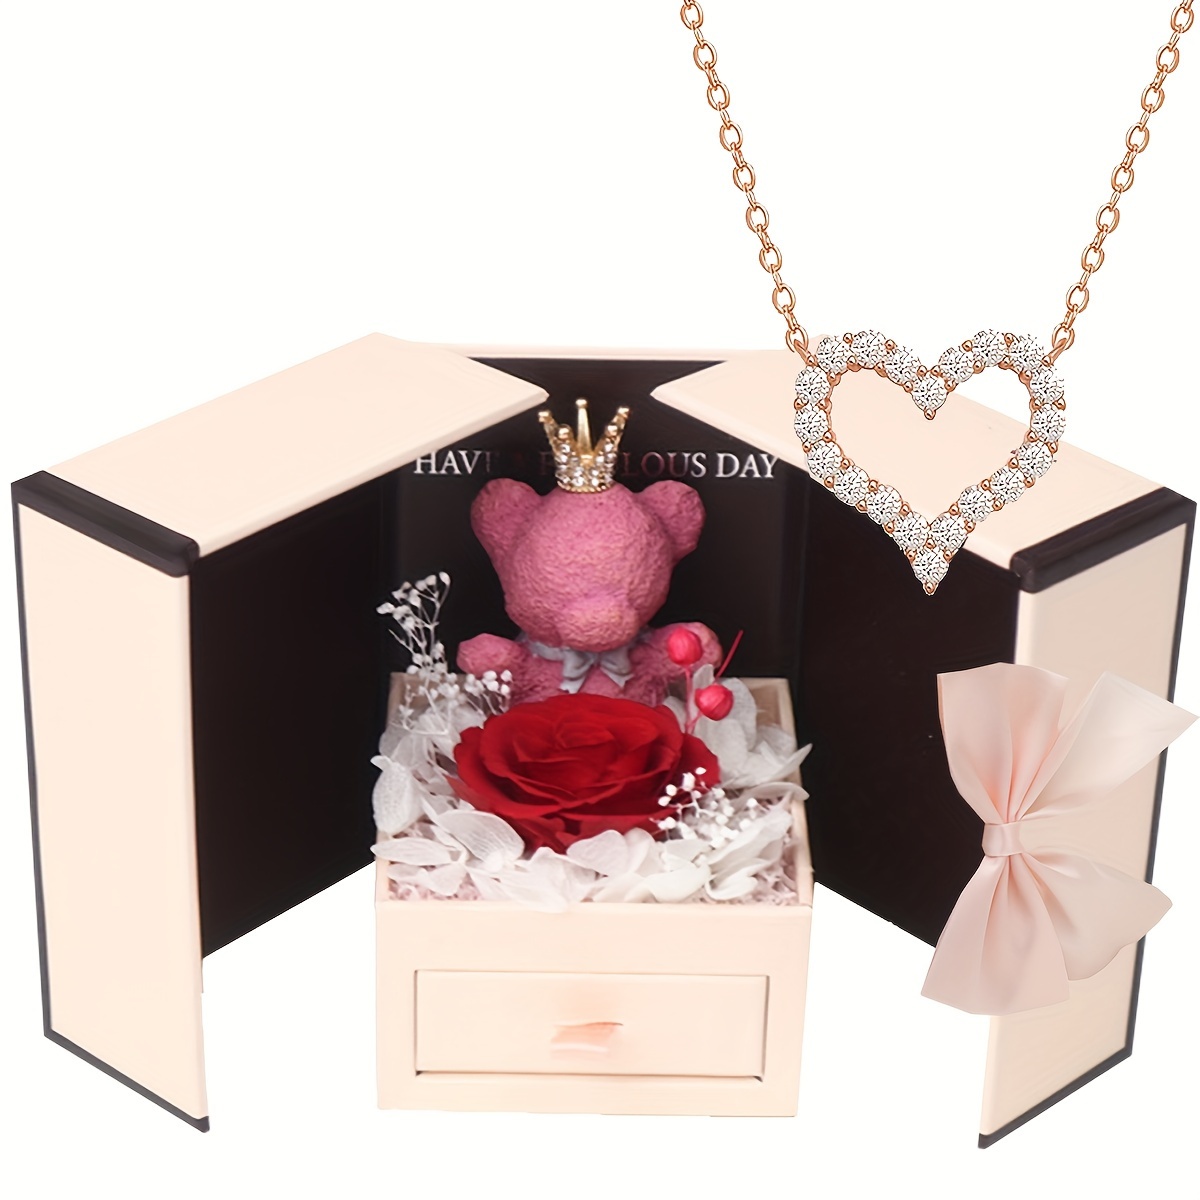 

1 Set Real Rose Gift Box With Heart-shaped Exquisite Necklace Elegant Versatile Jewelry Romantic Creative Birthday Anniversary Valentine's Day Mother's Day Gifts For Women